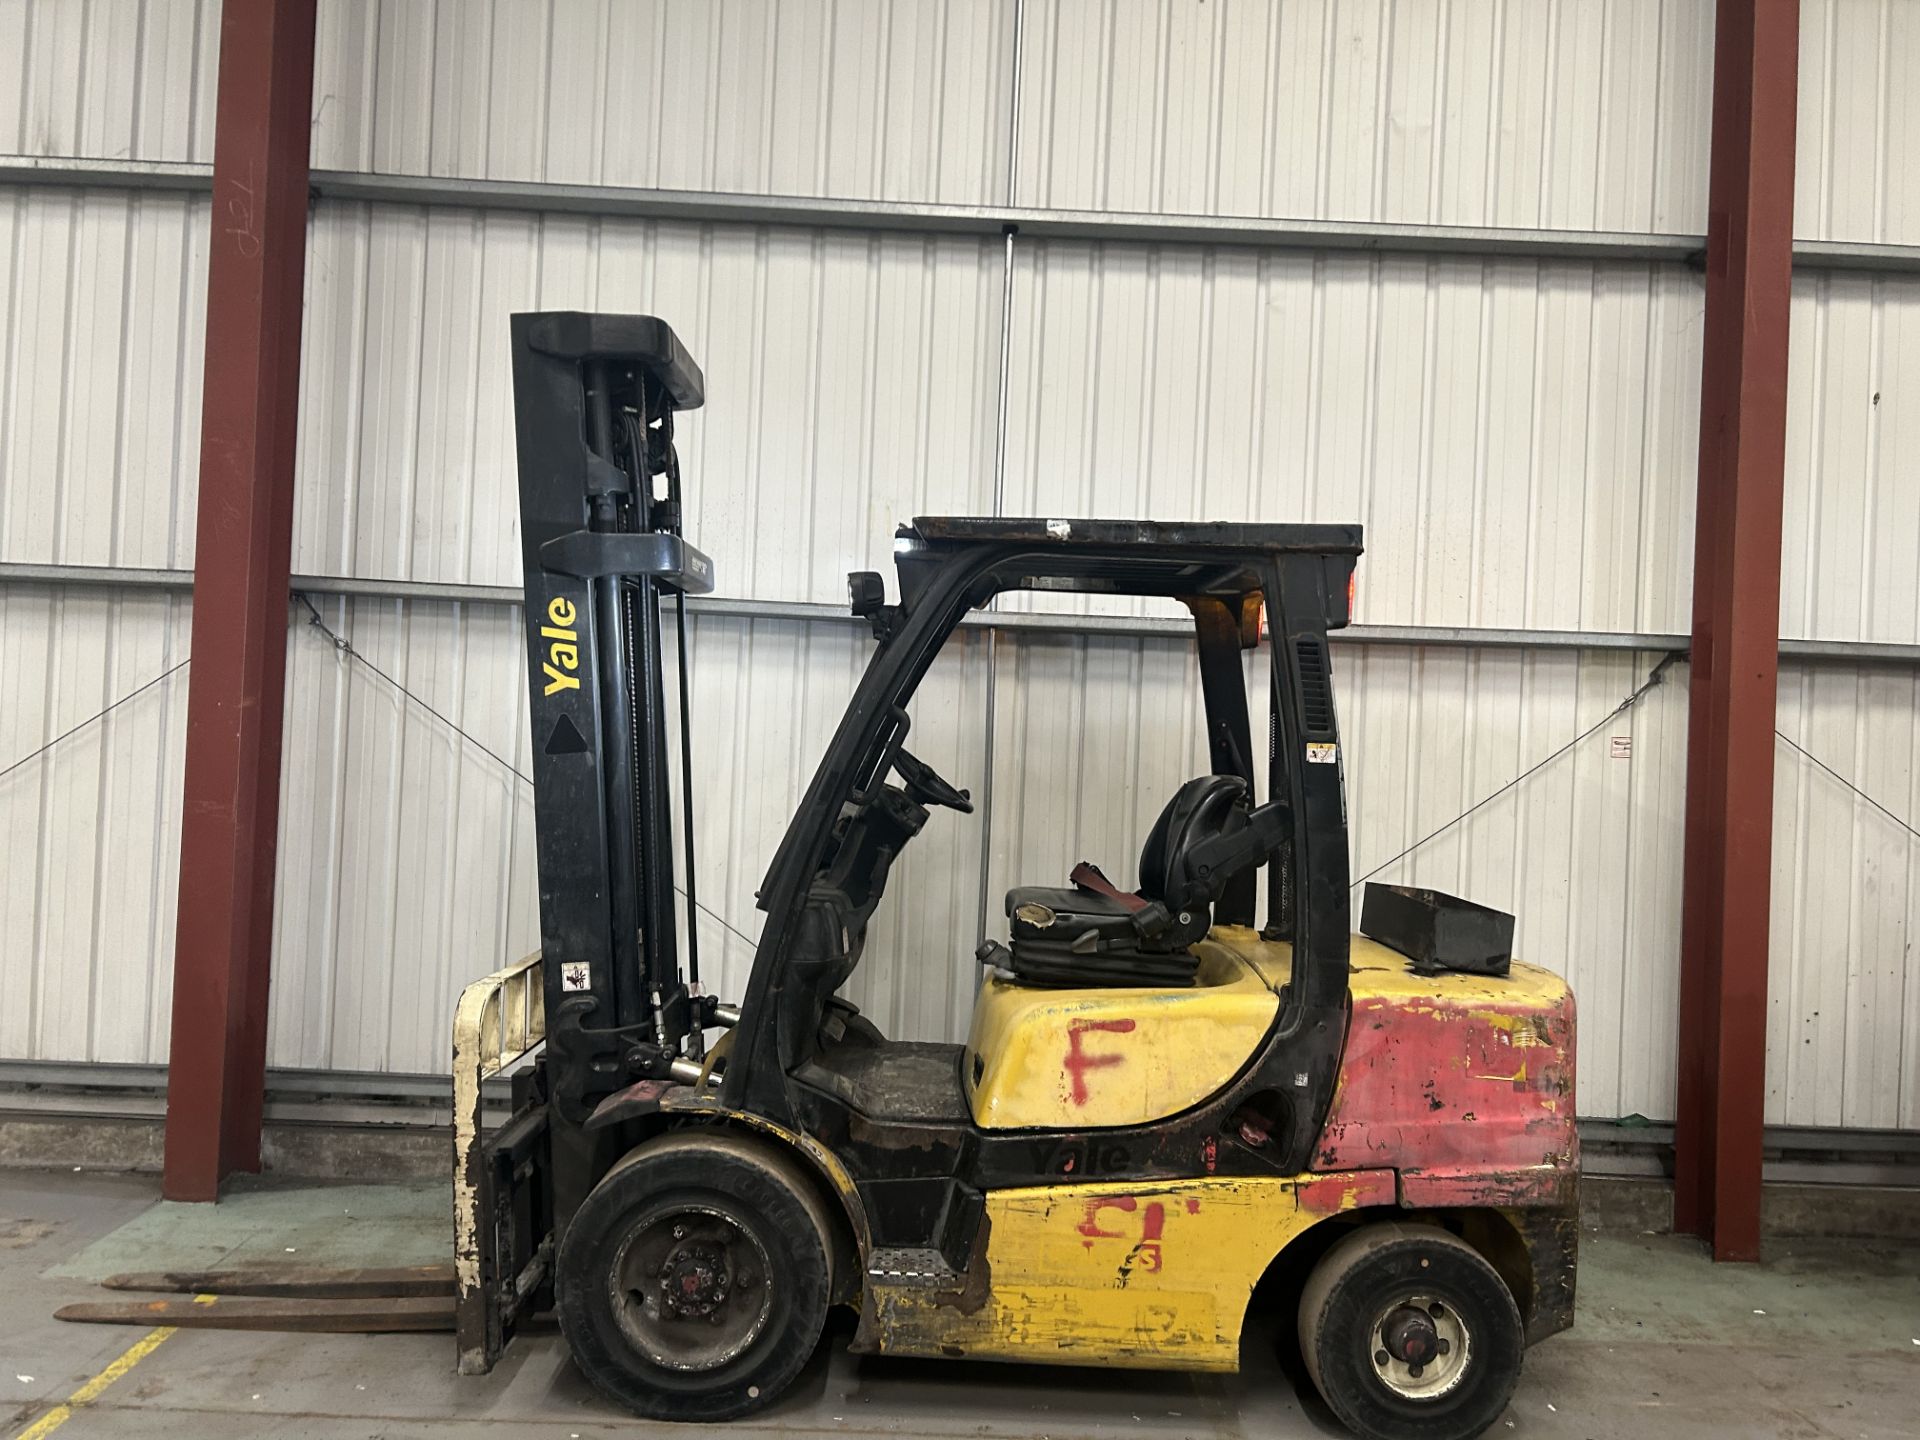 >>>SPECIAL CLEARANCE<<< DIESEL FORKLIFTS YALE GDP35VX - Image 6 of 6